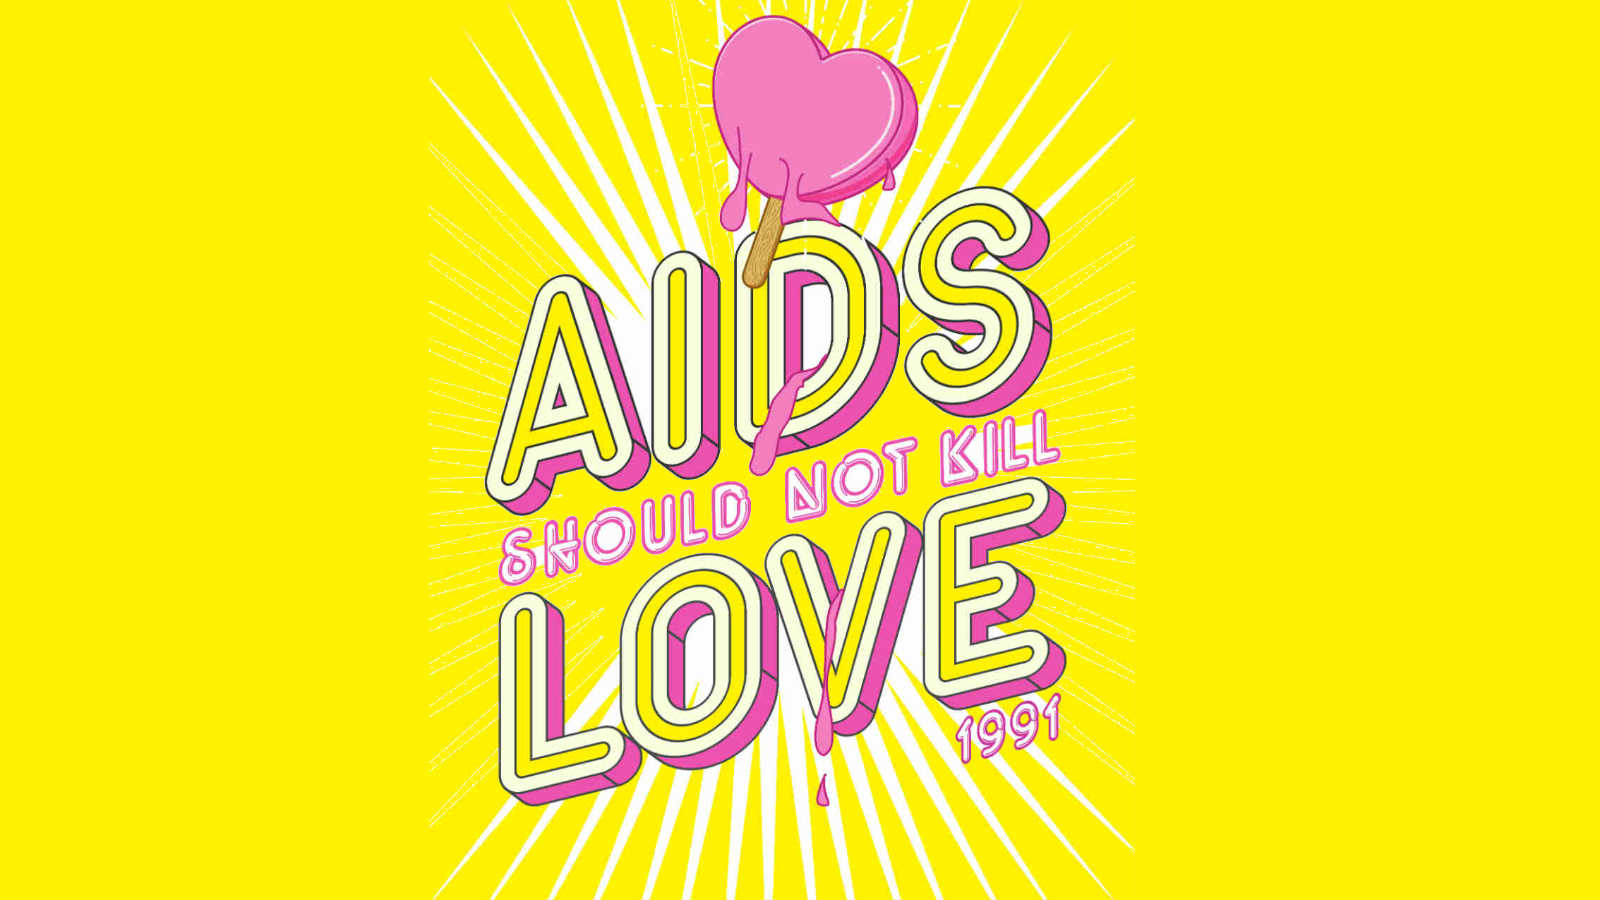 AIDS should not kill love poster